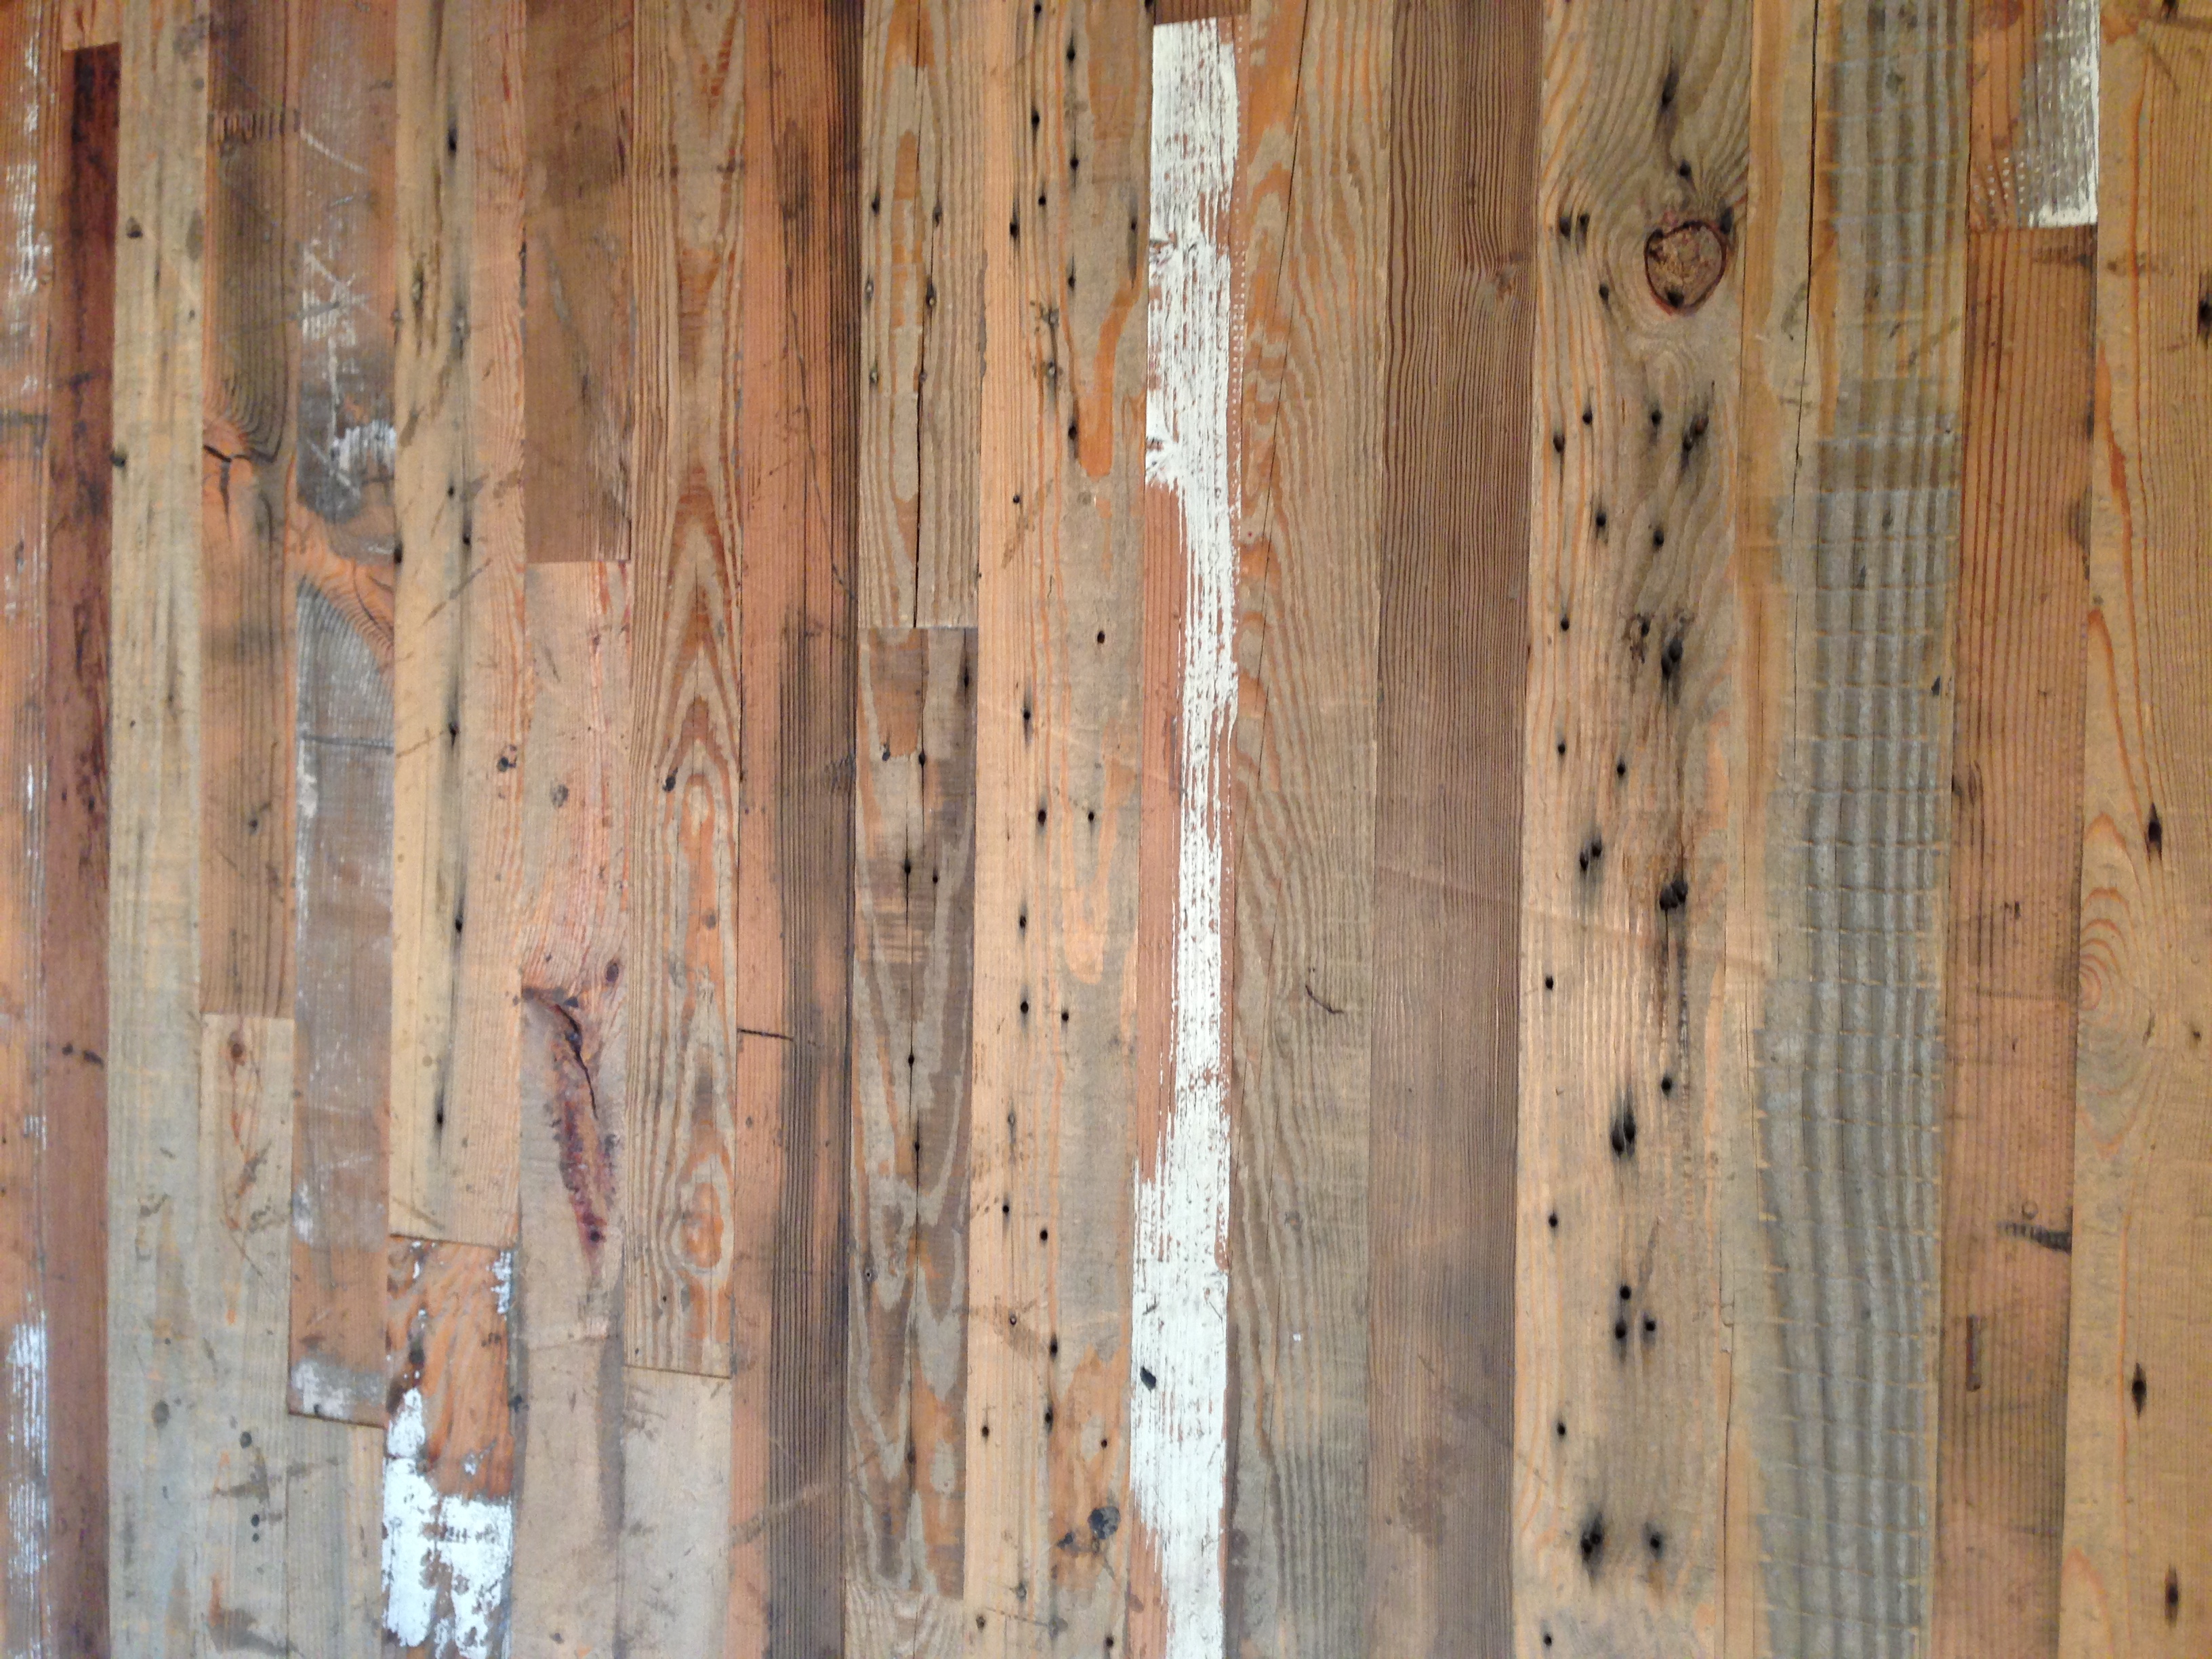 Download wallpaper that looks like distressed wood - Distressed